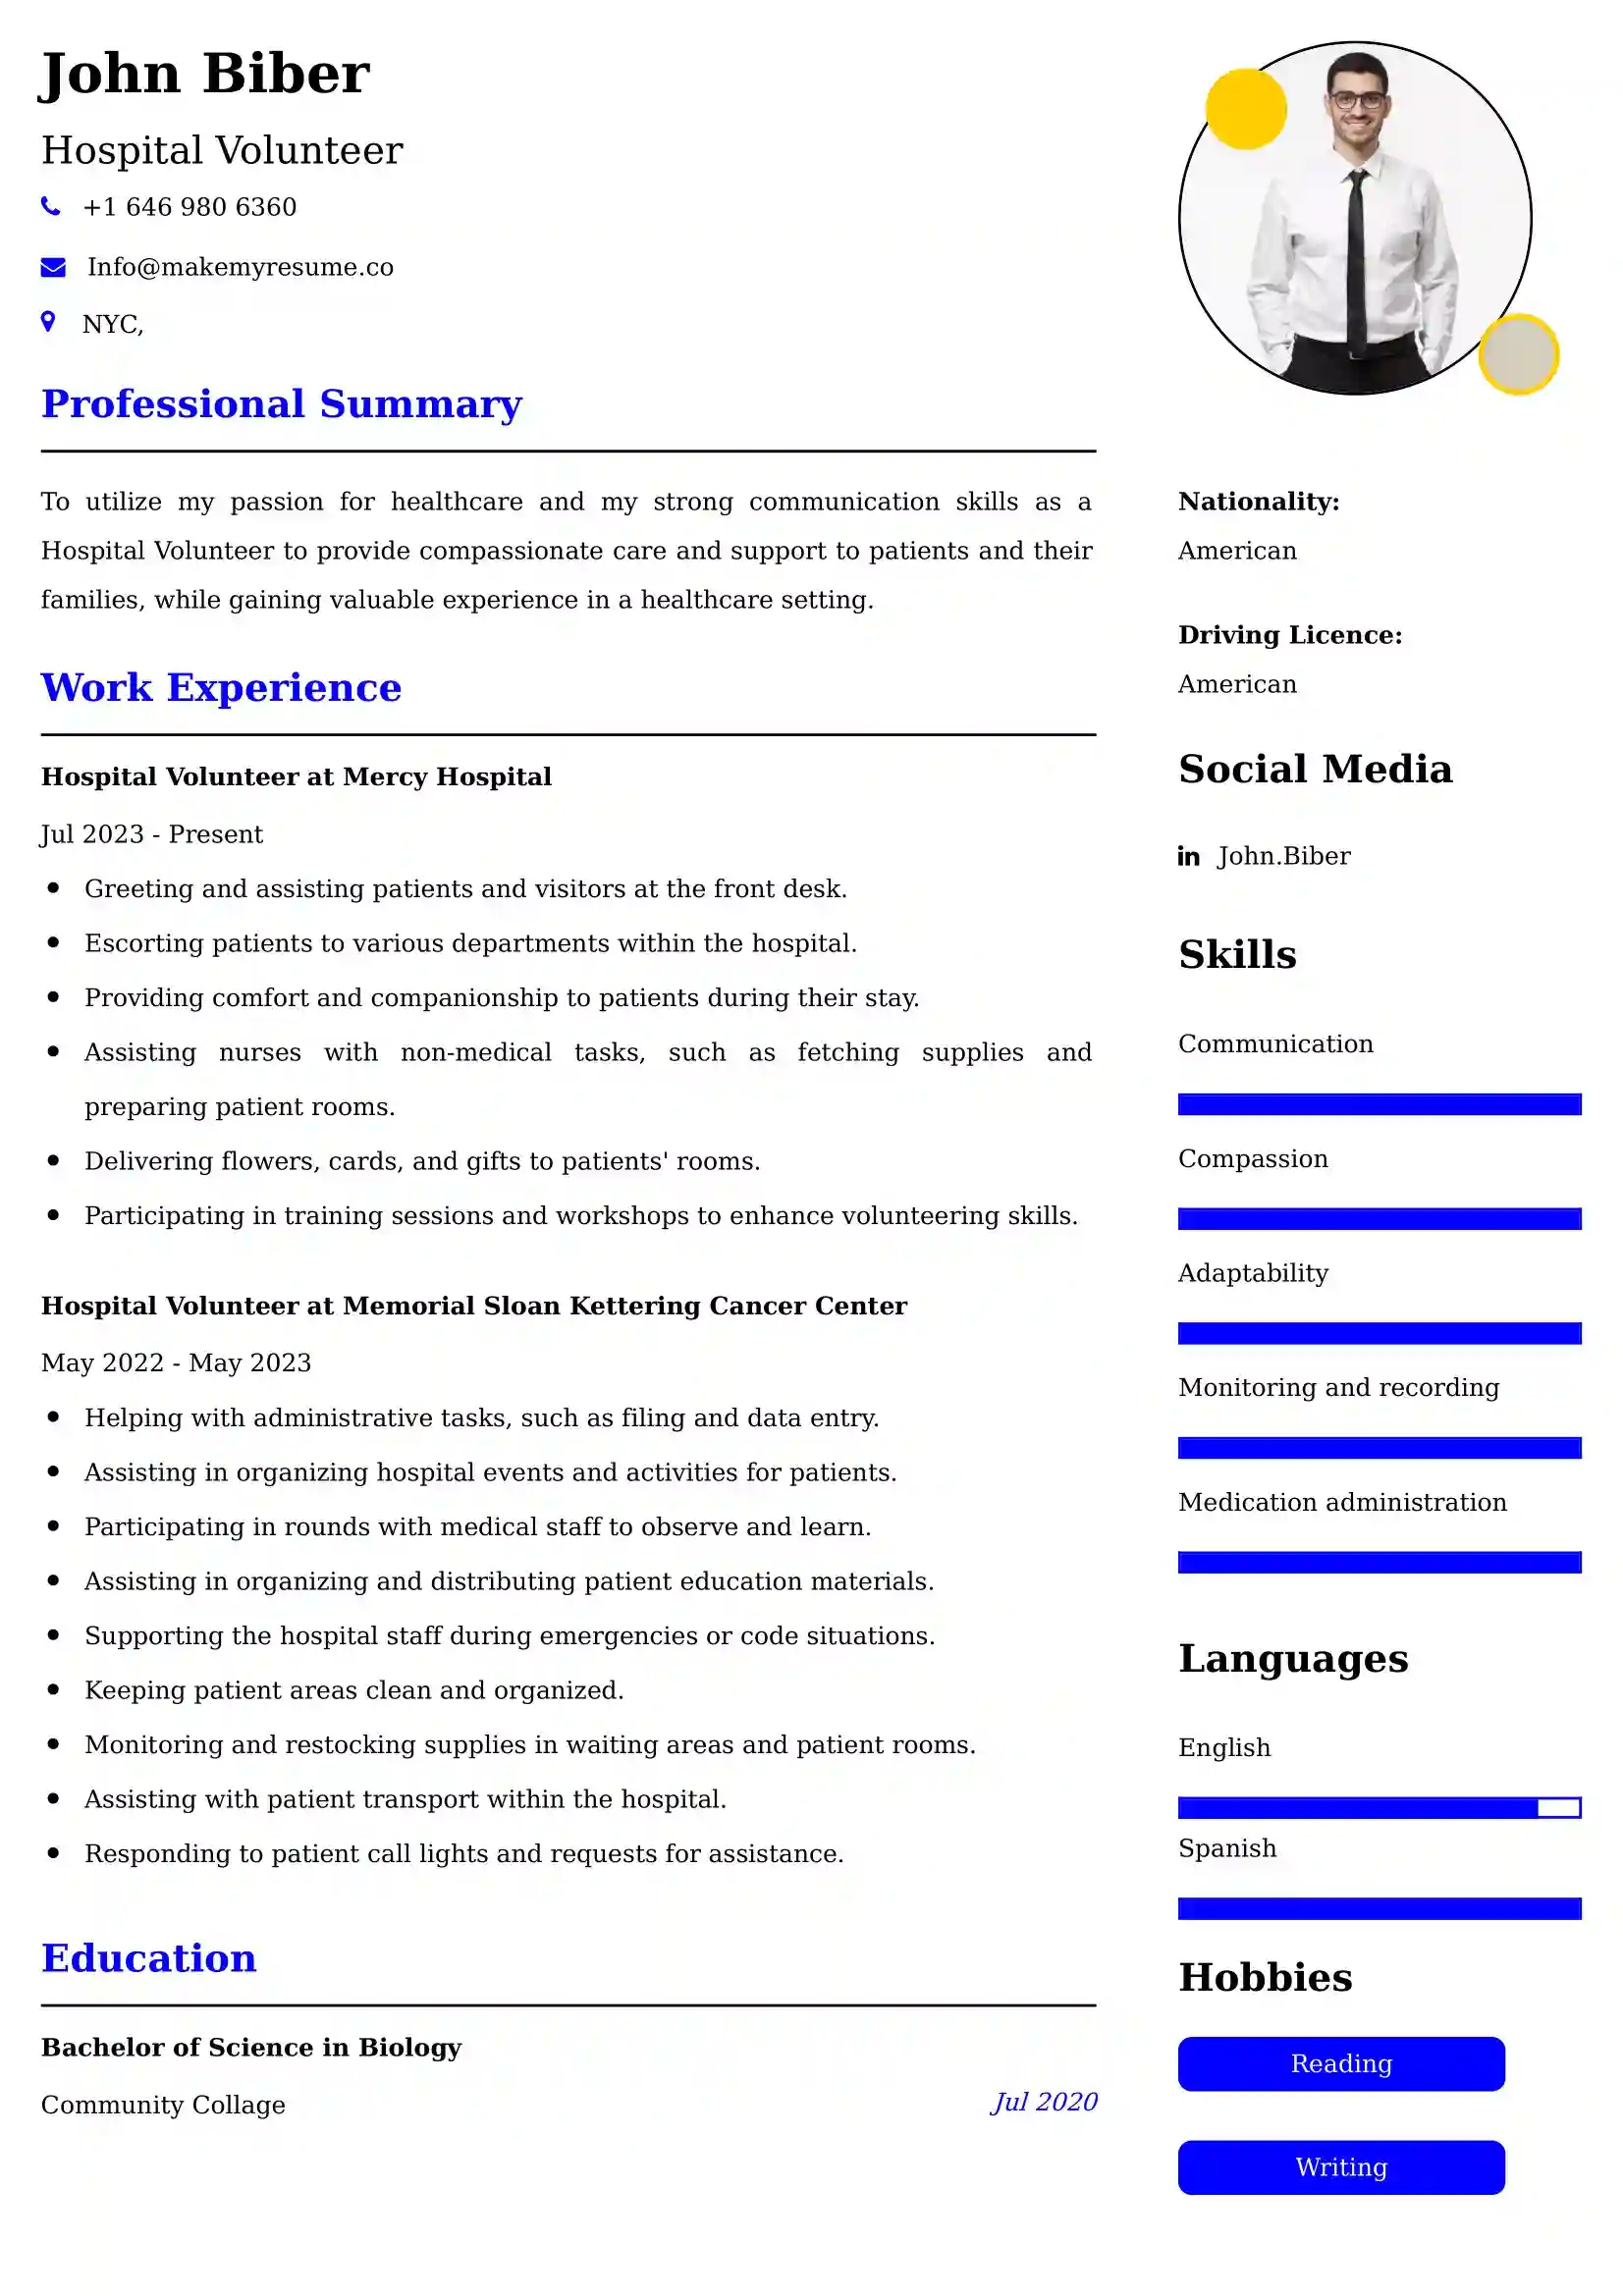 Hospital Volunteer Resume Examples for UK Jobs - Tips and Guide